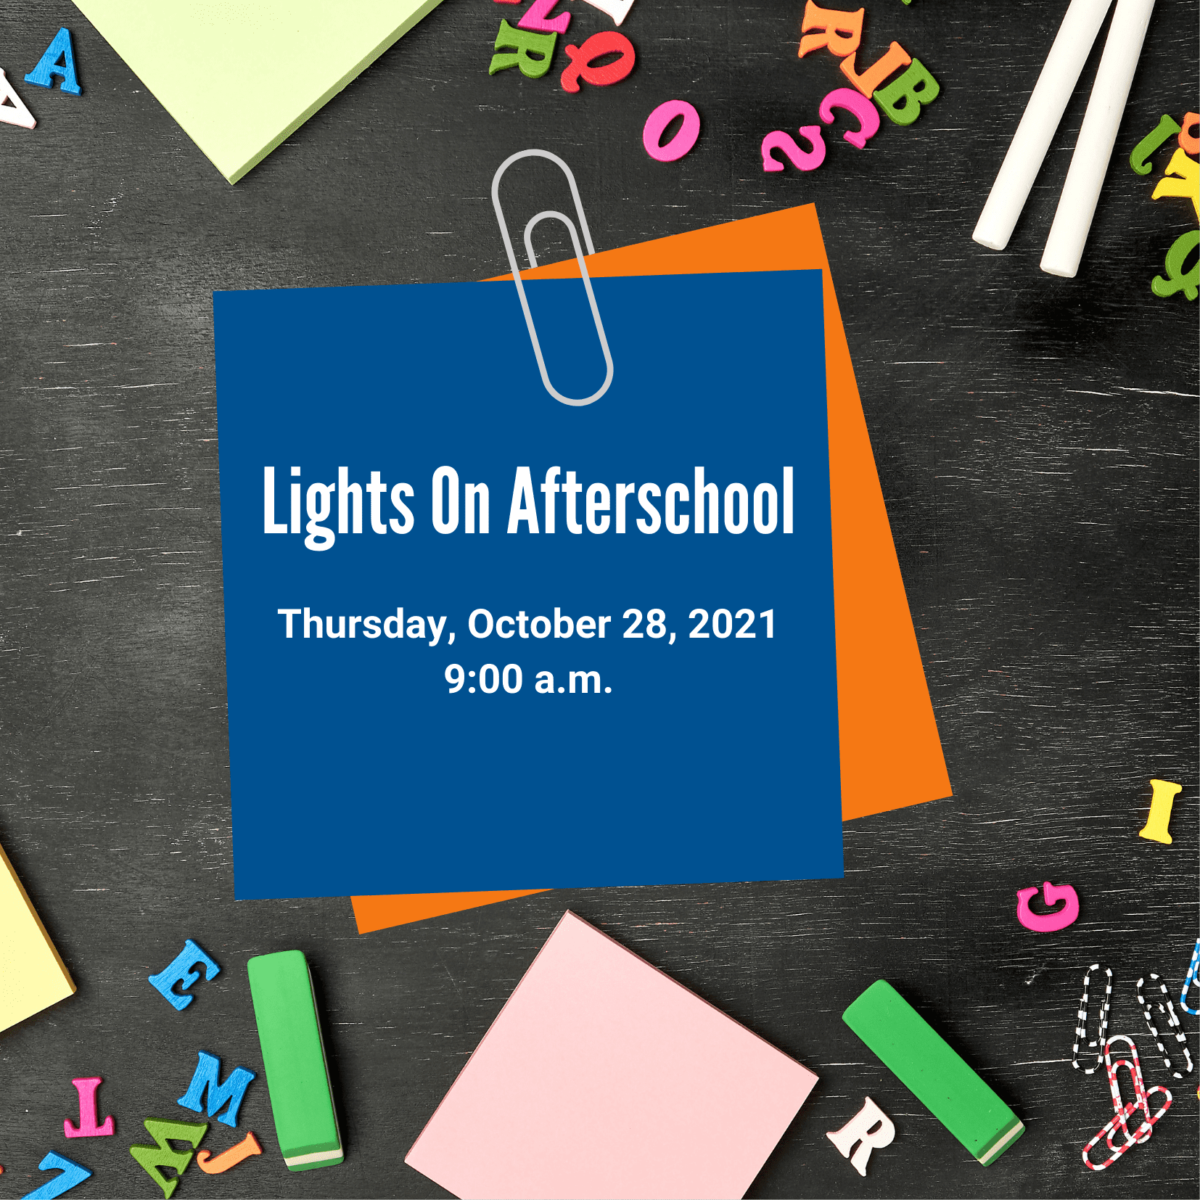 22nd annual Lights On Afterschool